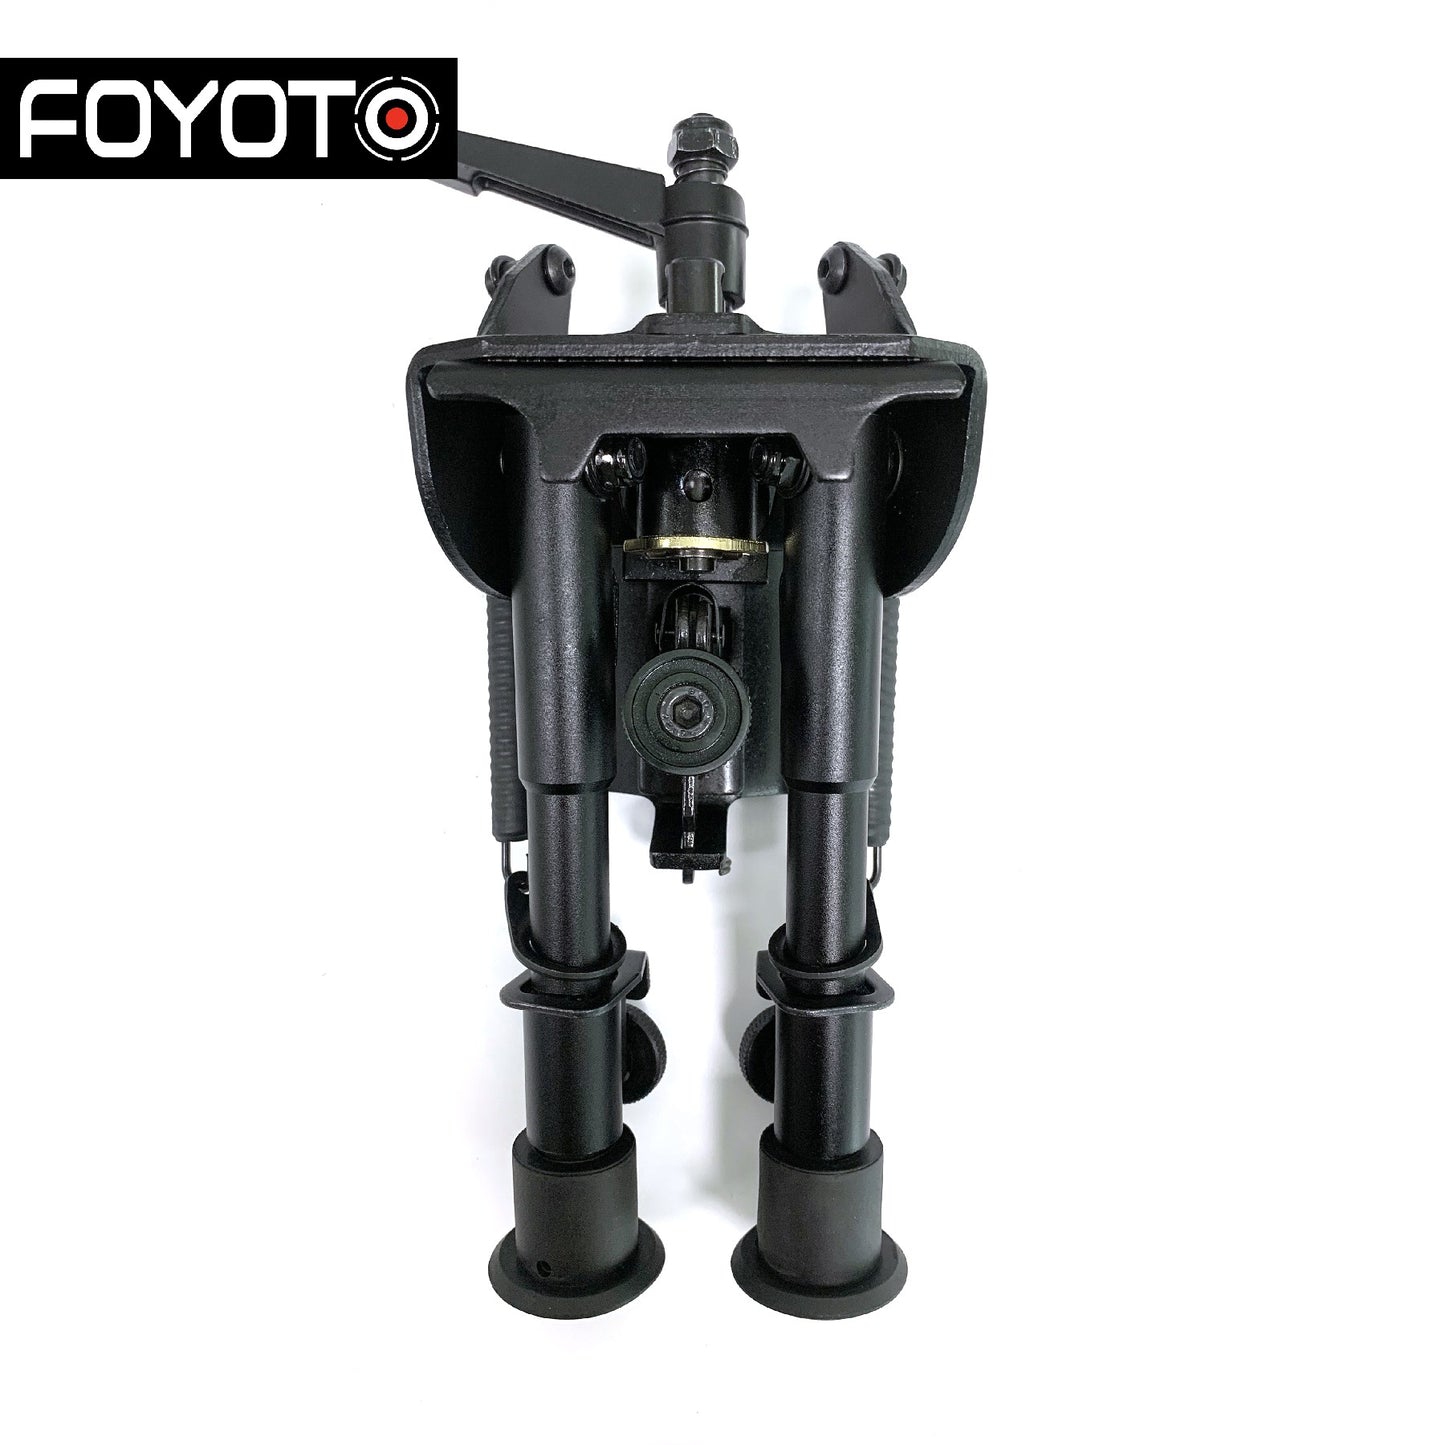 60 degree Rotate head with wrench Tactical Rifle Solid Base Pivot Traverse Adjustable Notched Legs Tripod for Shooting Hunting